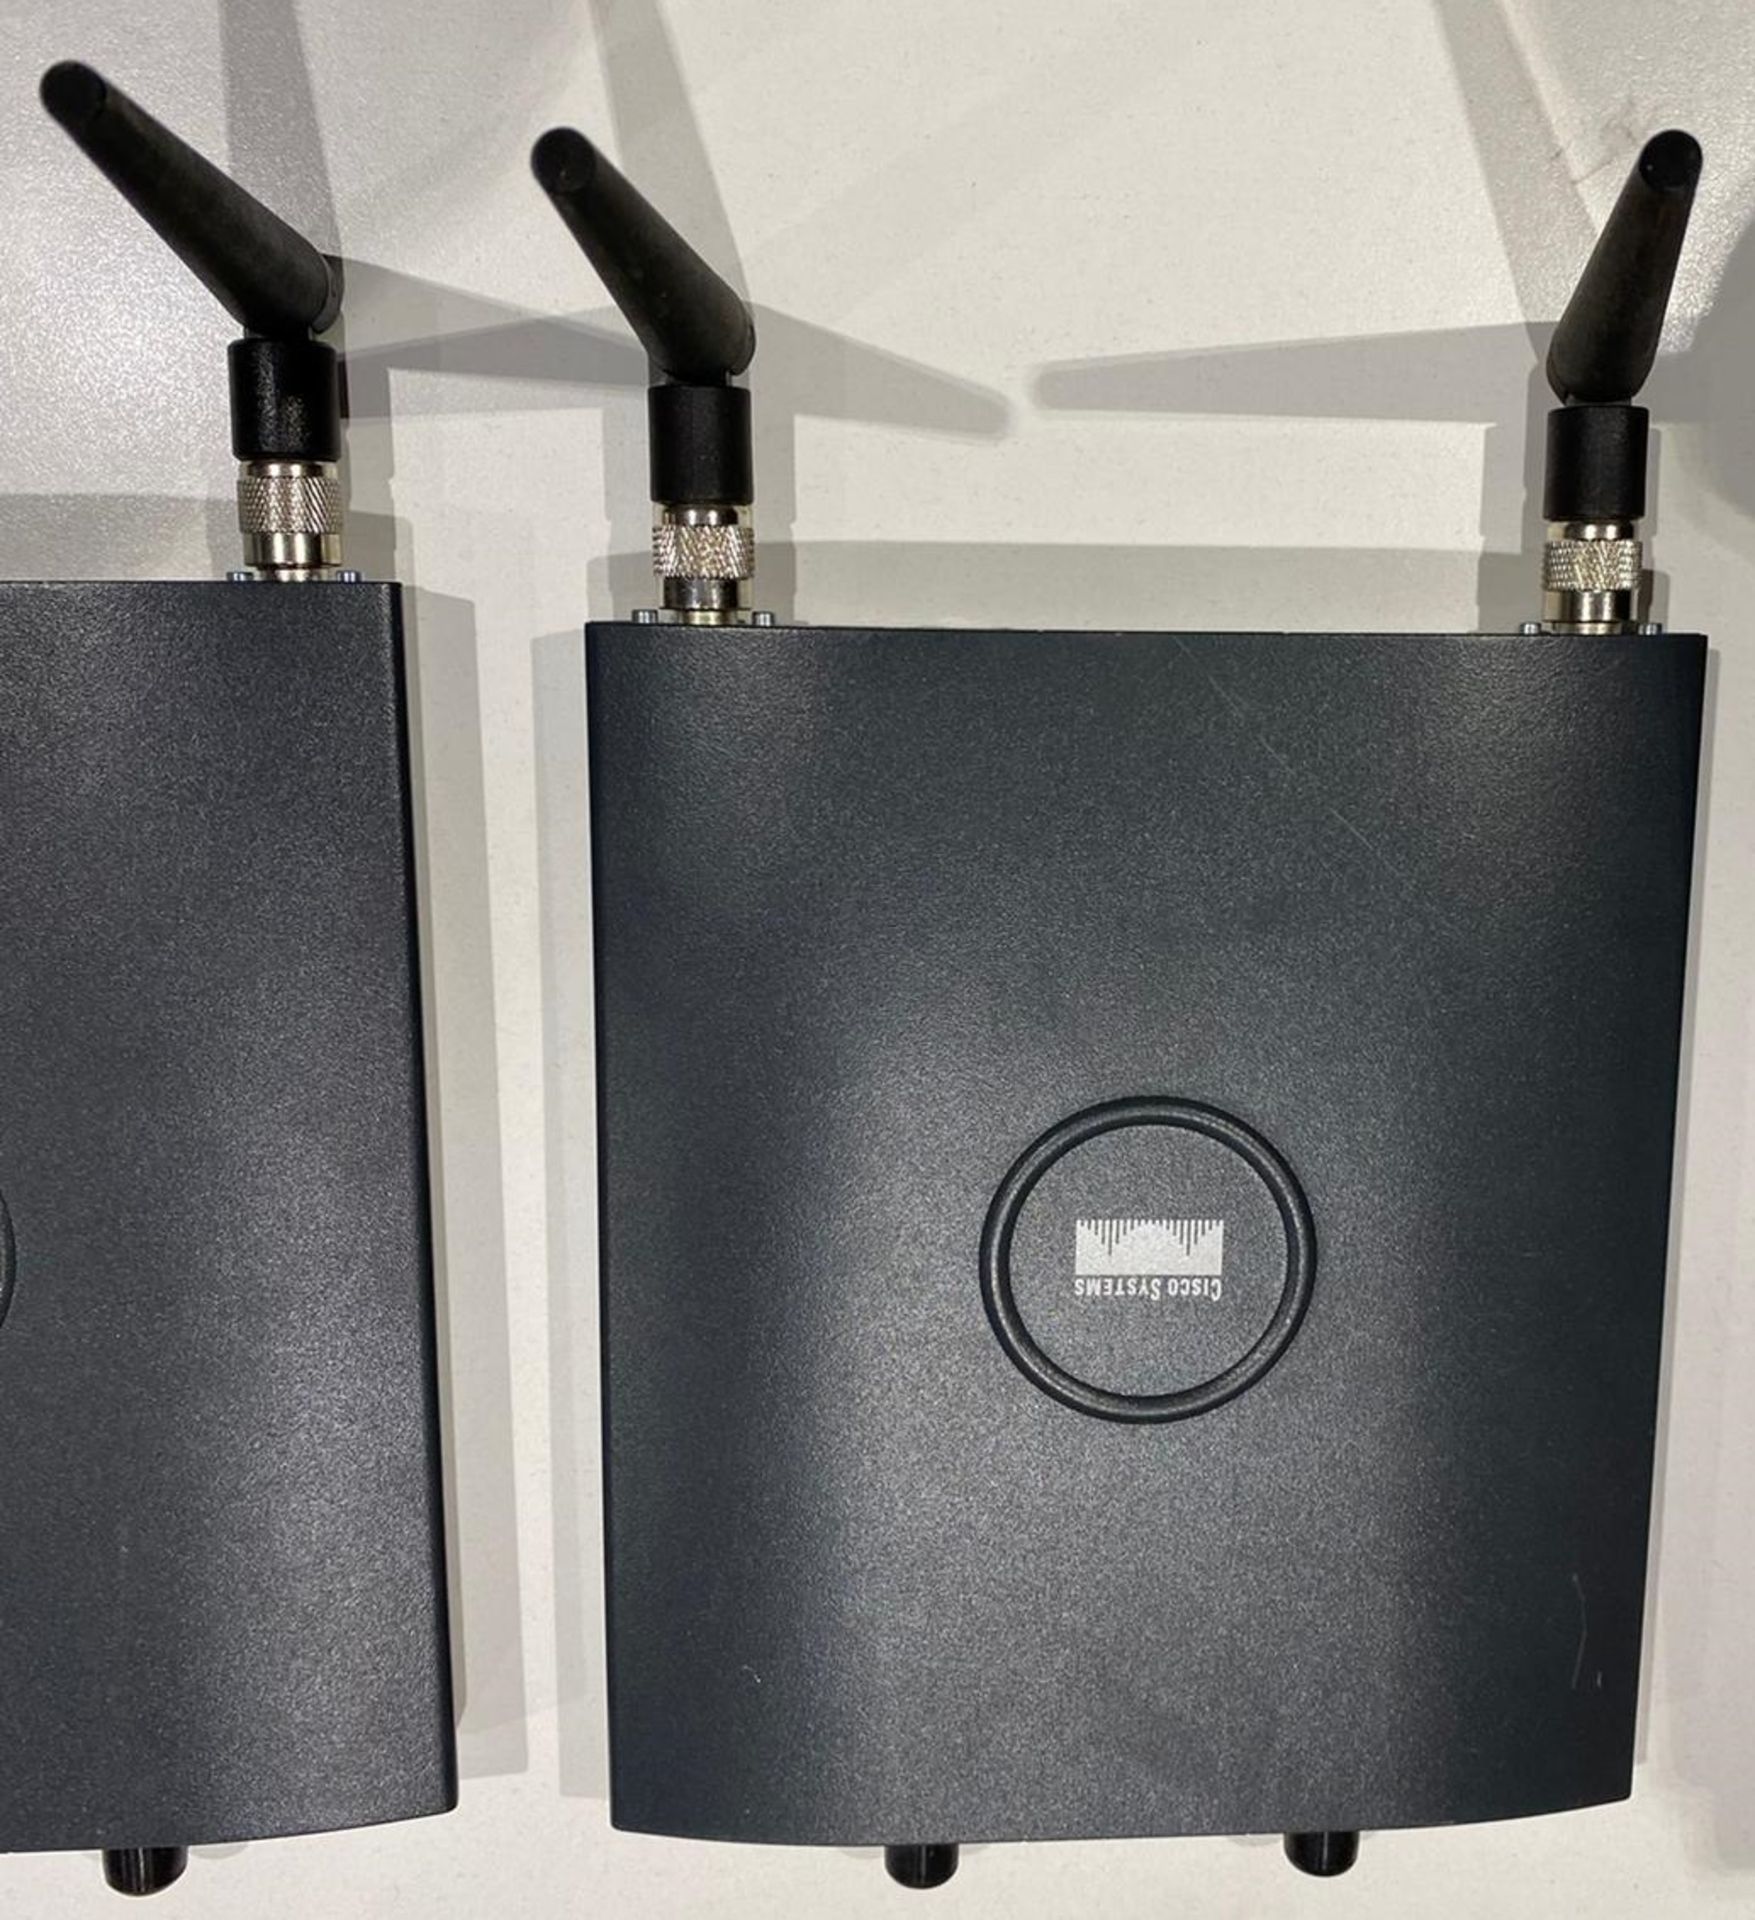 2 x Cisco Aironet 802.11a/b/g Access Point - Used Condition (see pictures)-Location: Altrincham WA14 - Image 3 of 9